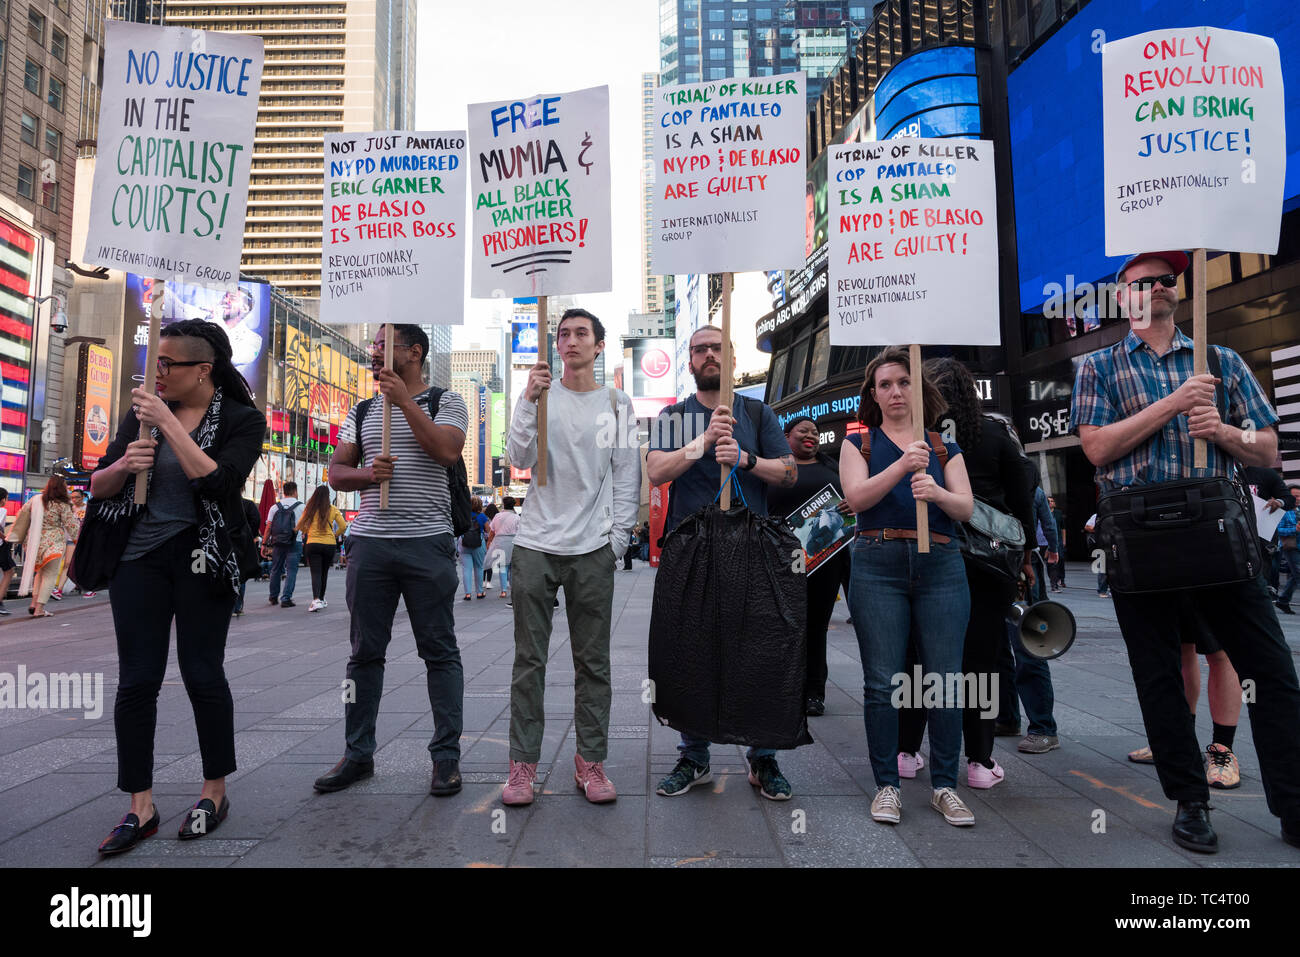 New York, United States. 04th June, 2019. On June 4, 2019, protesters rallied in Times Square in New York City demanding the firing of Officer Pantaleo for the choking death of Eric Garner in 2014. Daniel Pantaleo is currently standing administrative trial which began on May 13. On May 21, the judge overseeing his case delayed the remainder of the hearing until June 5, 2019. Pantaleo has been on desk duty since Eric Garner's death and could face penalties ranging from loss of vacation days to firing from the NYPD. Credit: Gabriele Holtermann-Gorden/Pacific Press/Alamy Live News Stock Photo